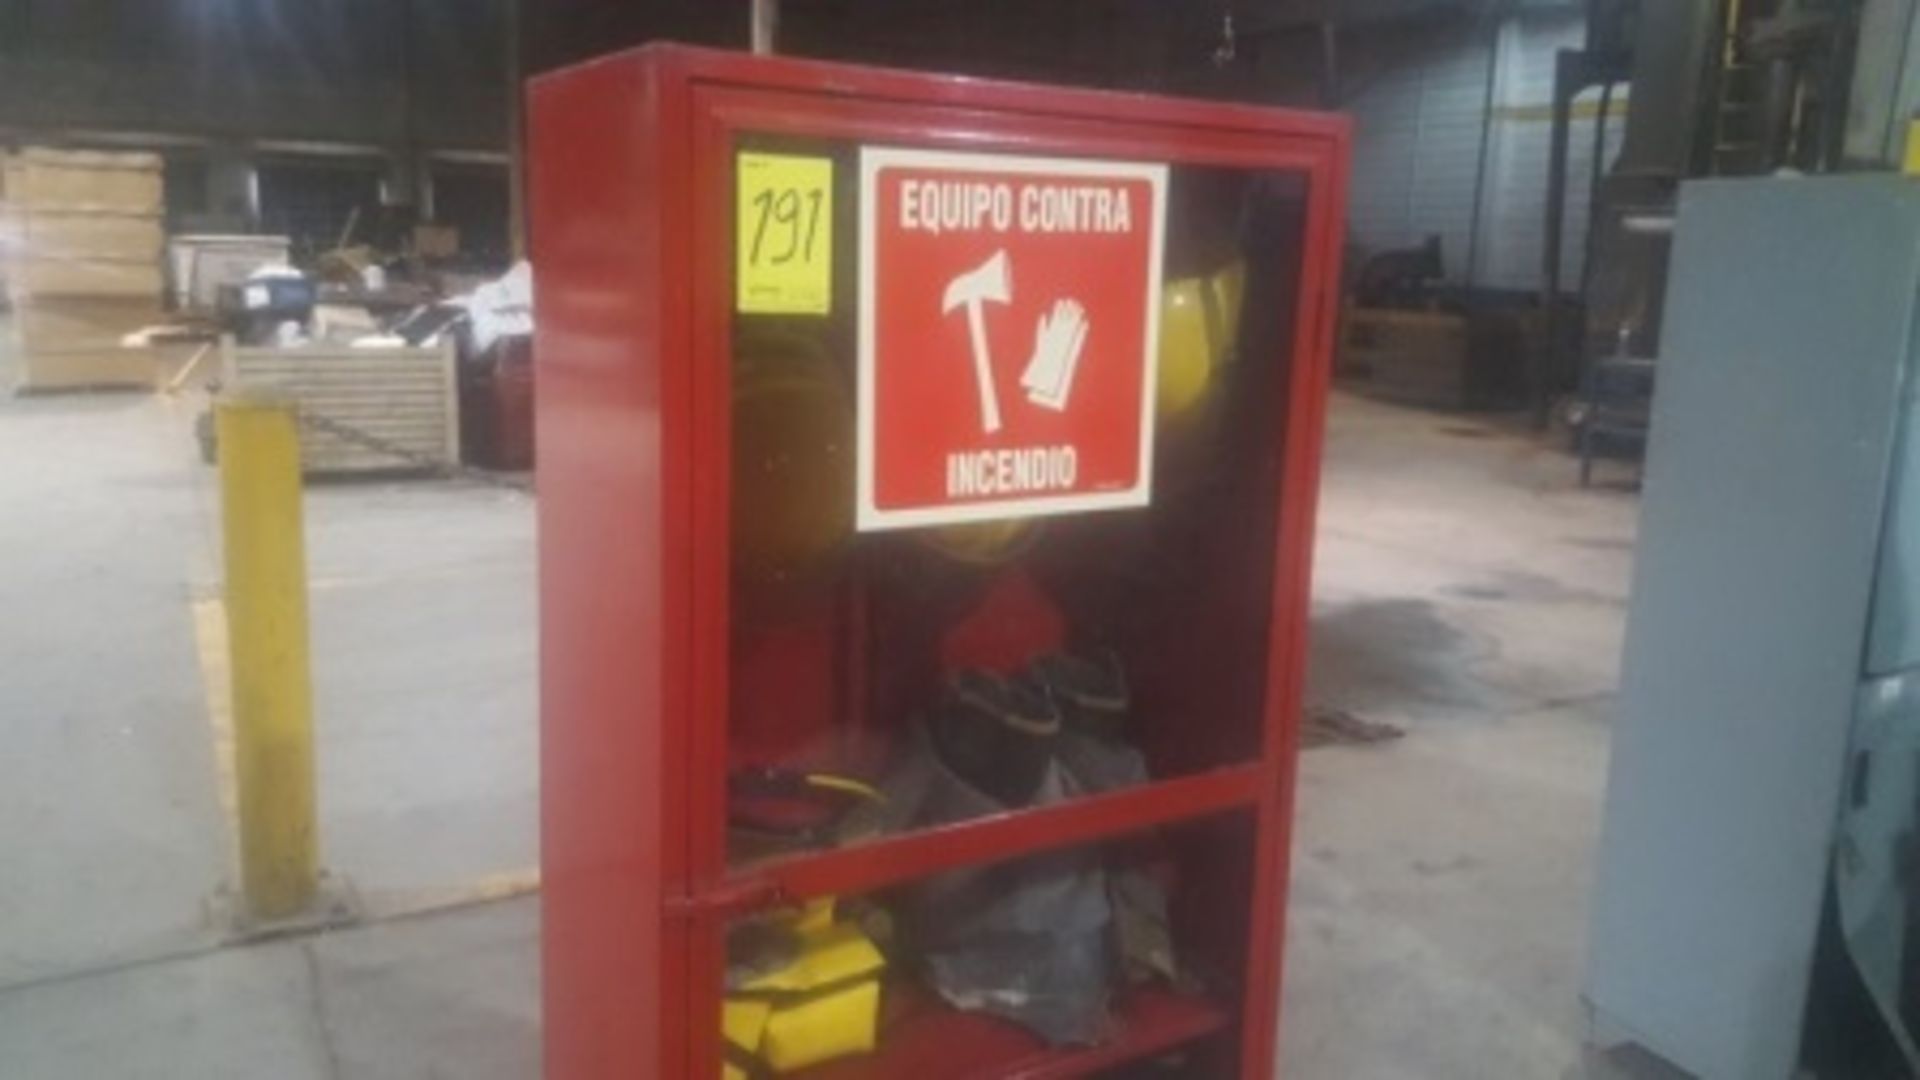 (2) Cabinets with firefighting gear